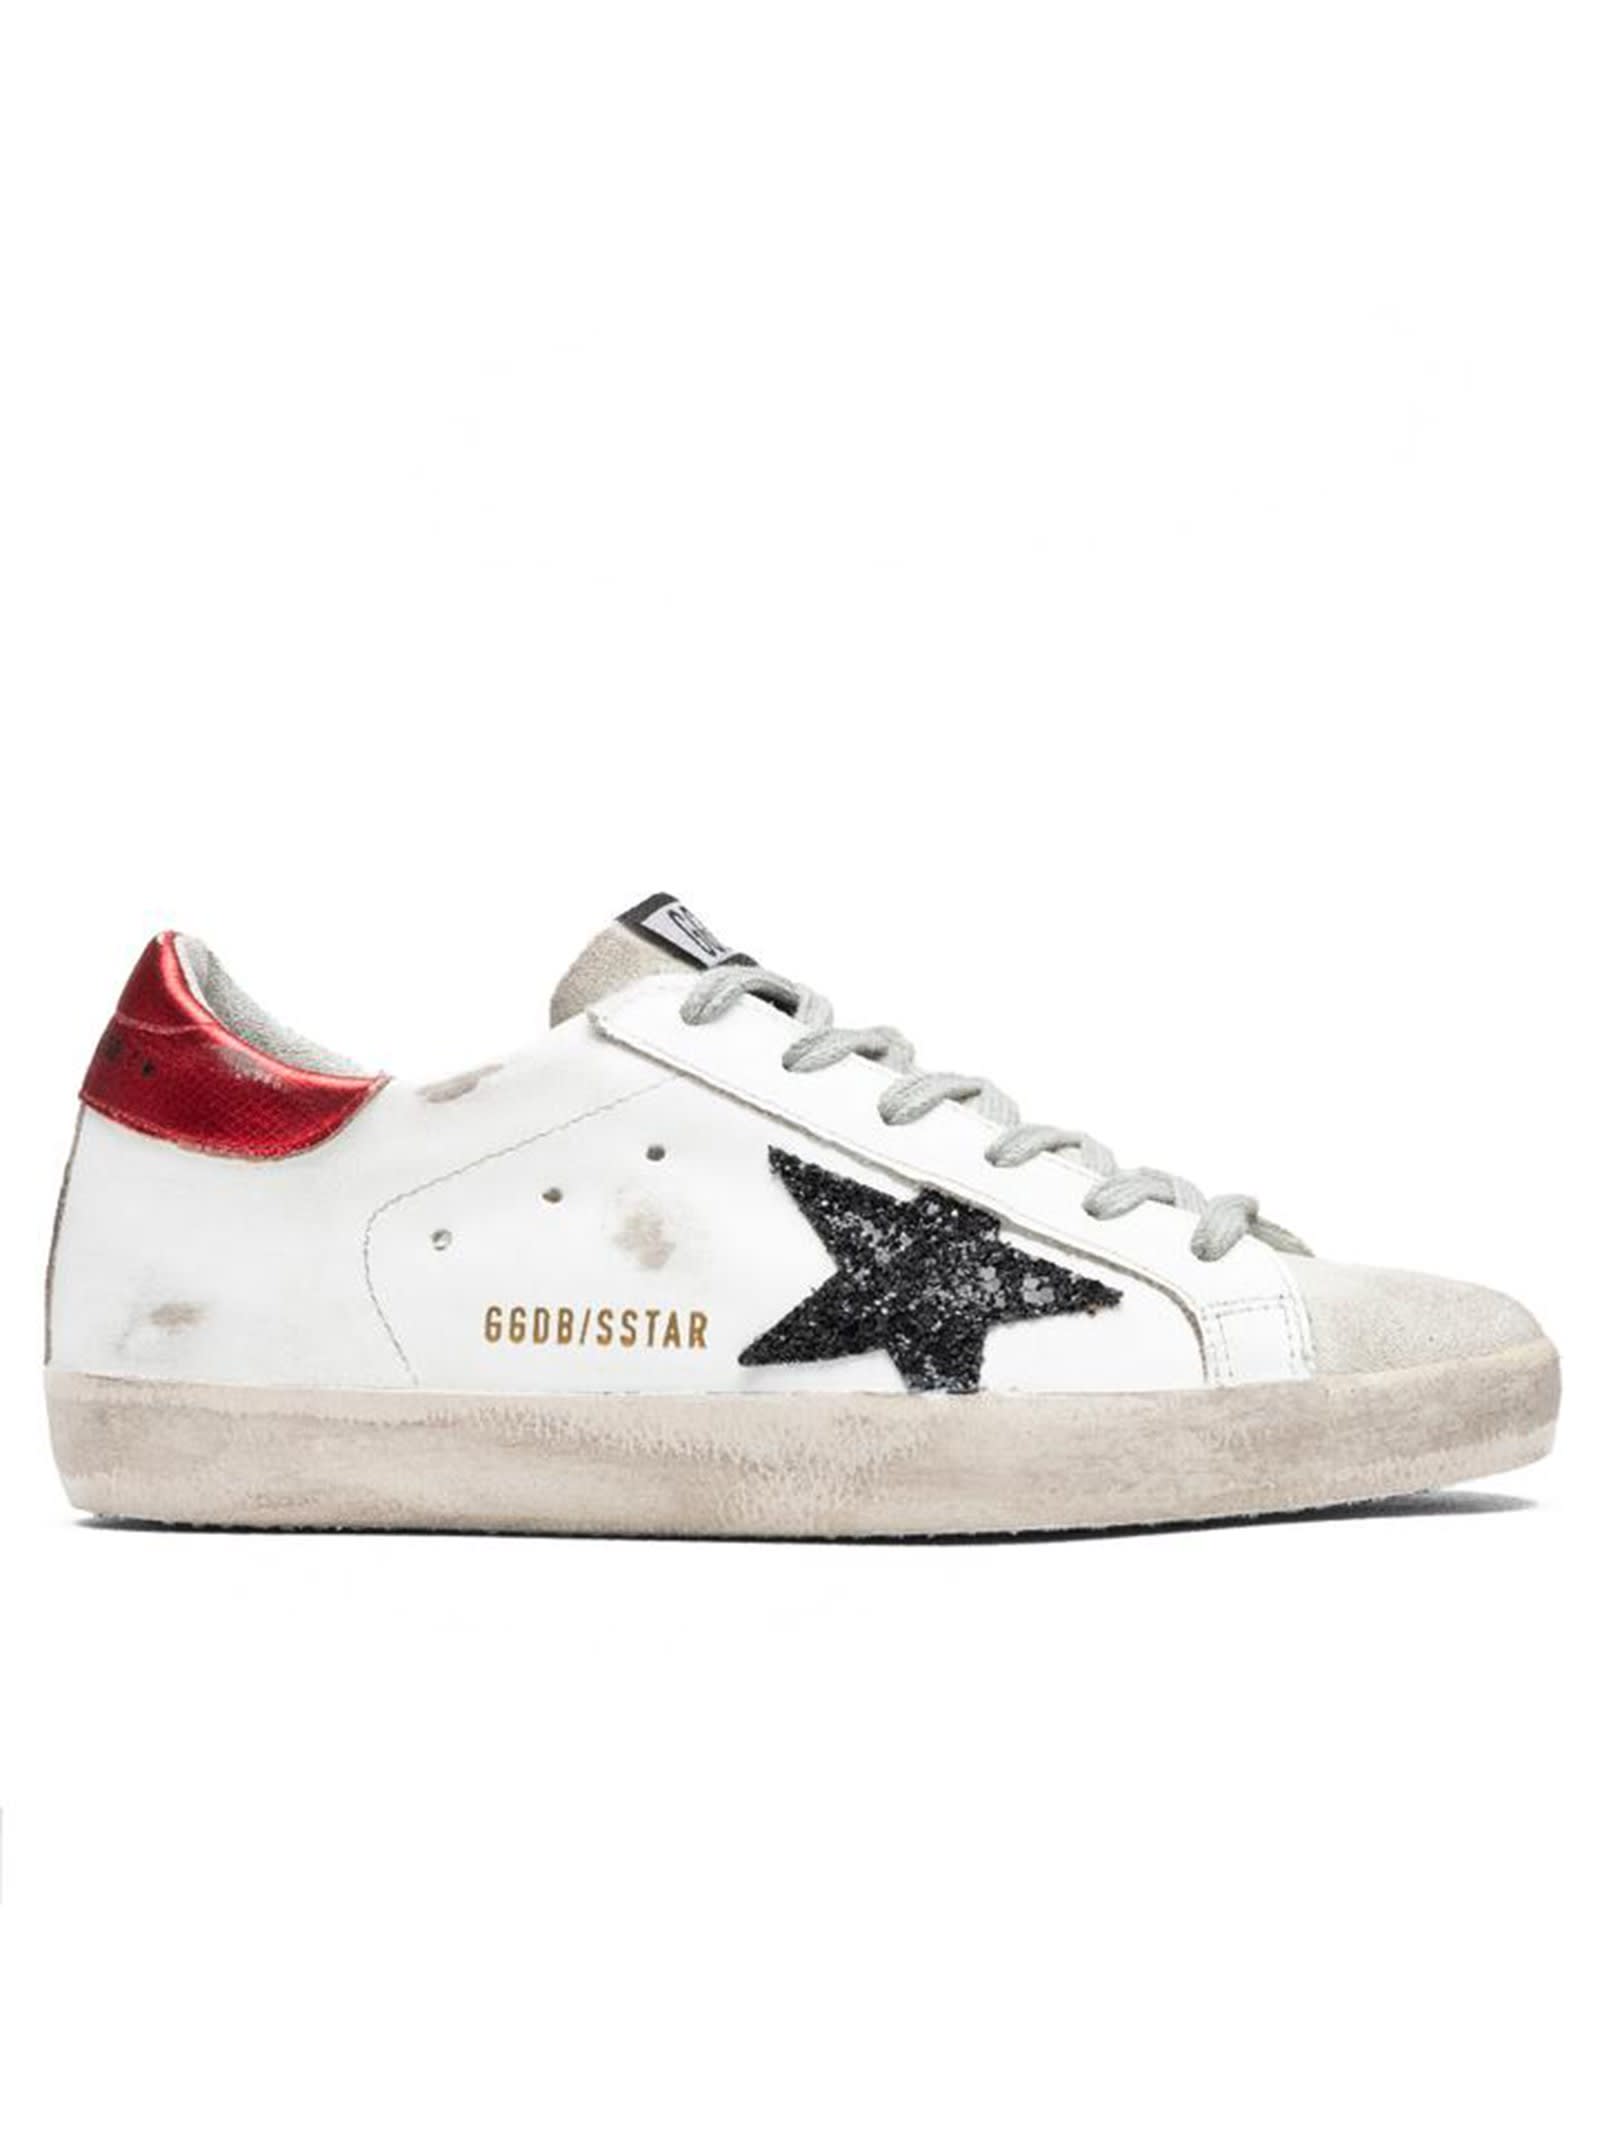 Buy Golden Goose White Superstar Sneakers online, shop Golden Goose shoes with free shipping